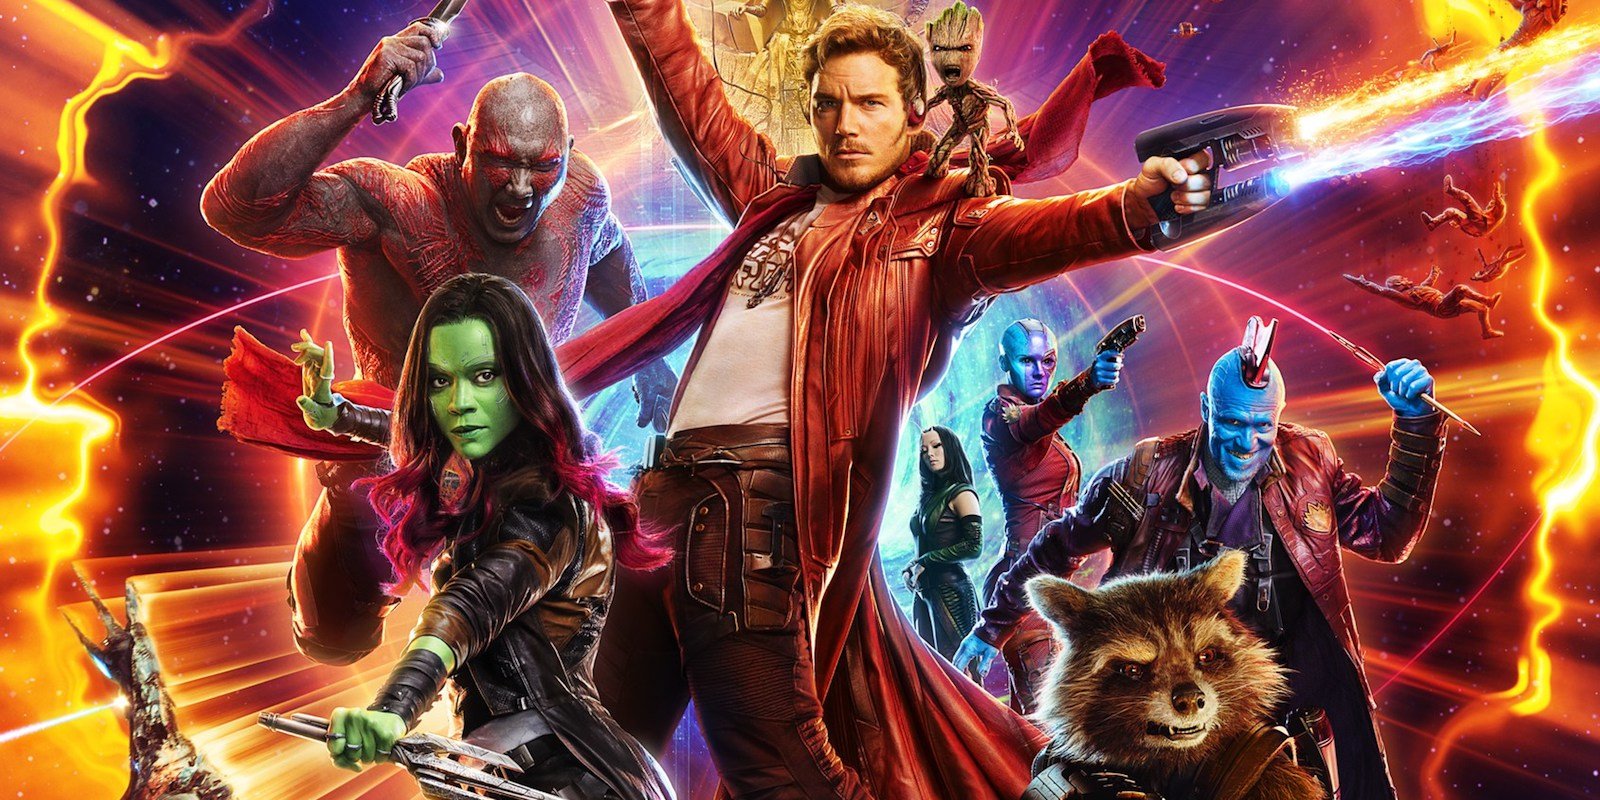 Movie review for the new Action Comedy GUARDIANS OF THE GALAXY VOL. 2, opening in theatres May 5th, 2017. | Movie review for the new Action Comedy GUARDIANS OF THE GALAXY VOL. 2, opening in theatres May 5th, 2017.